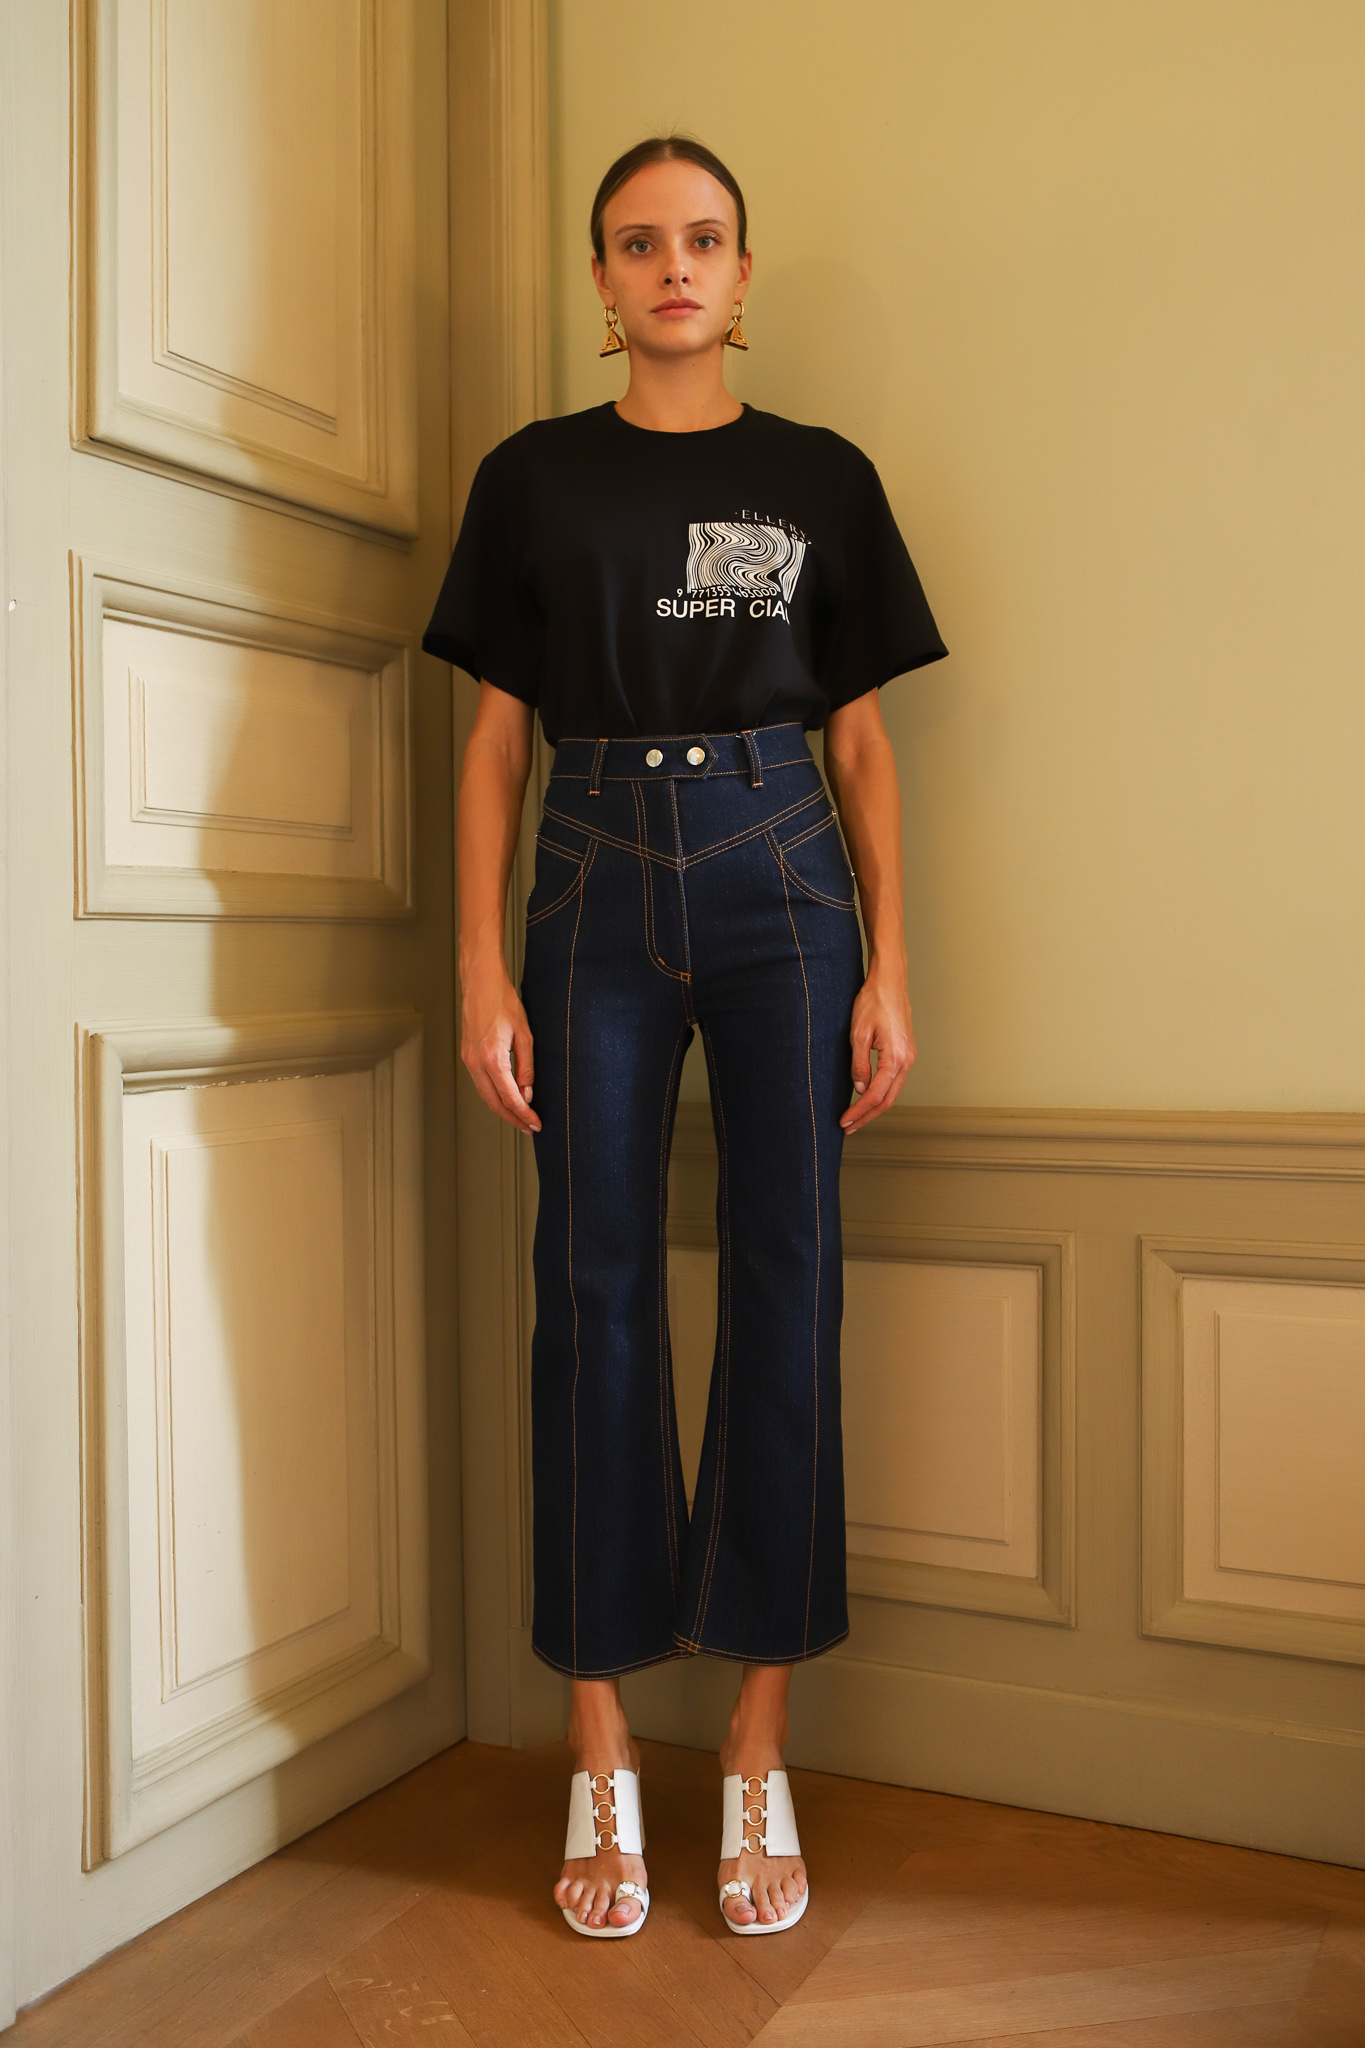 Ellery Super Ciao T Shirt in Black Cropped Flared Jeans in Blue Spring 20 RTW